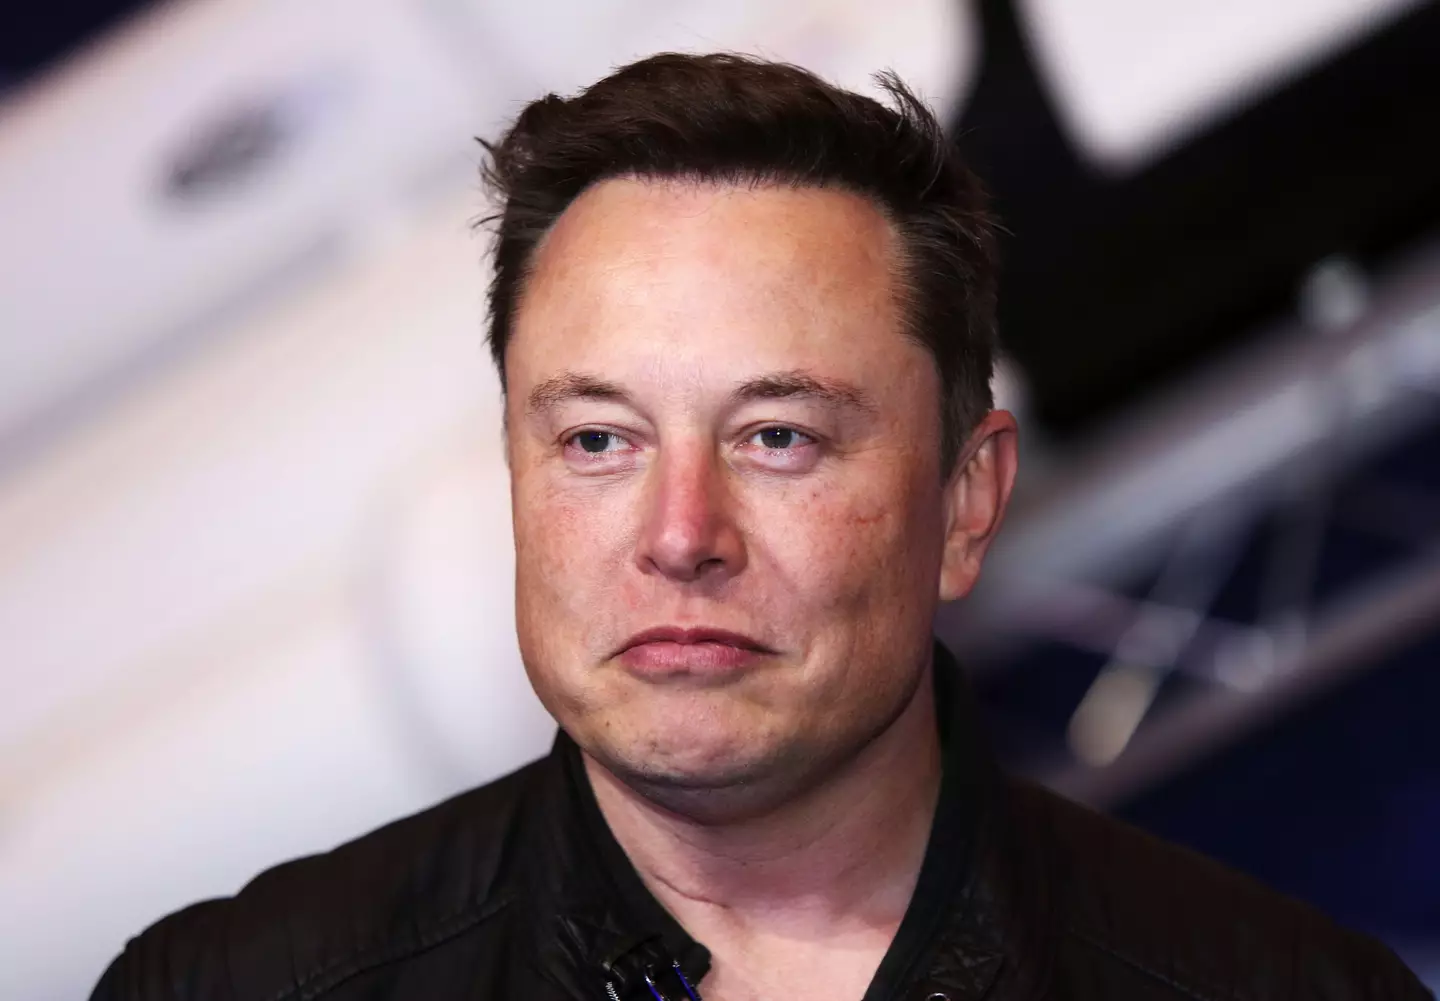 Musk appears to be having a difficult time of it.